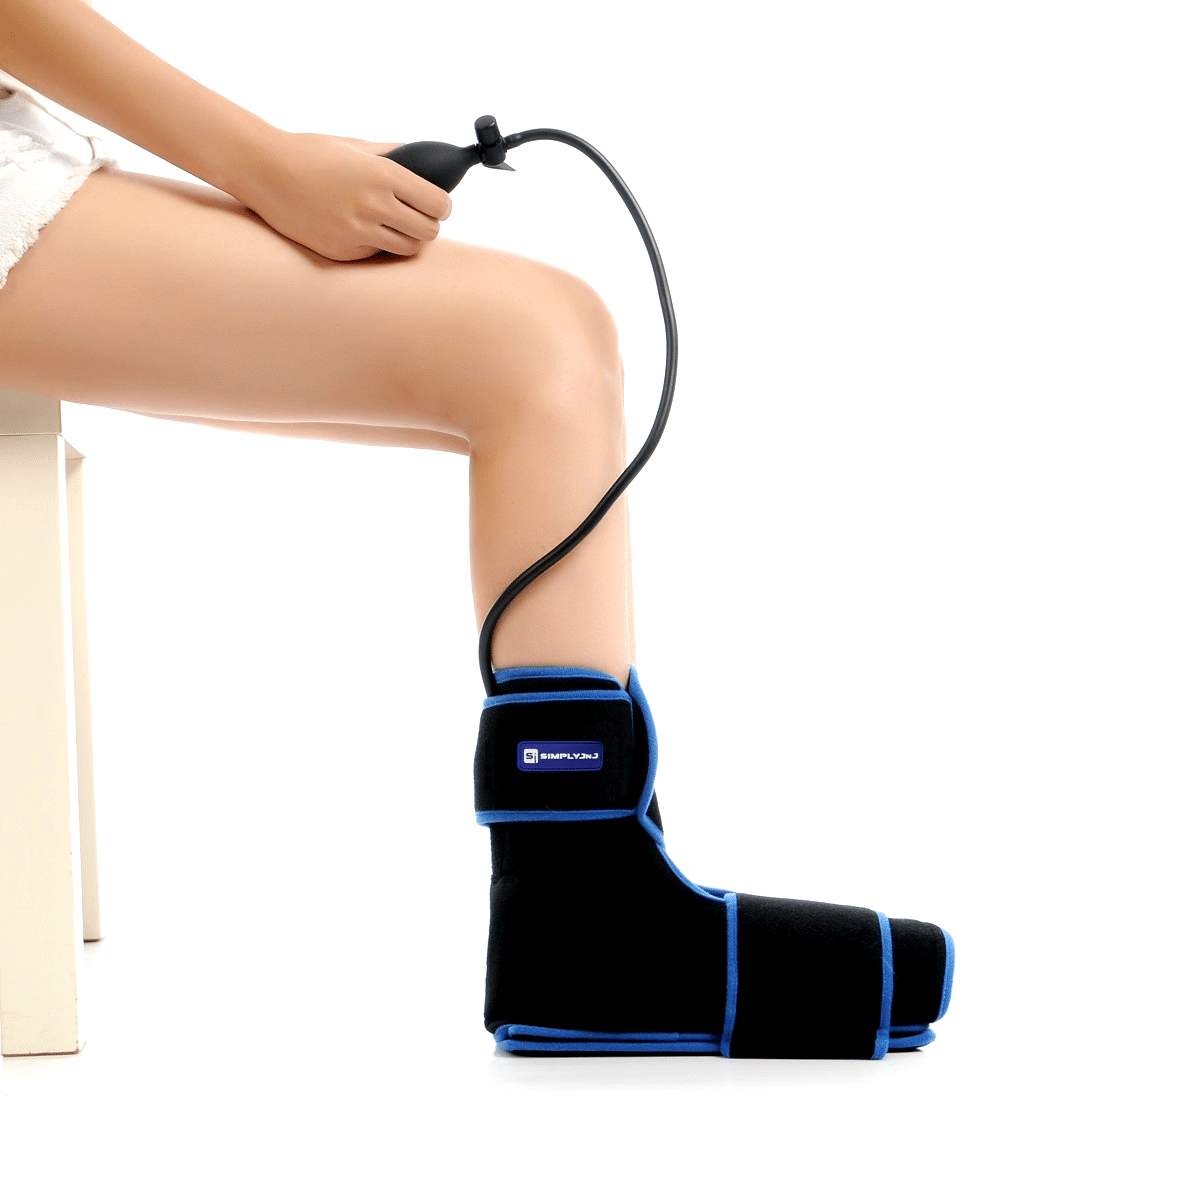 Heated or Cooled Extra Ice Pack Targets All Areas Treat My Feet Foot & Ankle Pain Relief Hot/Cold Boot Foot Wrap Effectively Relieve Foot and Ankle Aches & Pains Using Compression Gel wrap